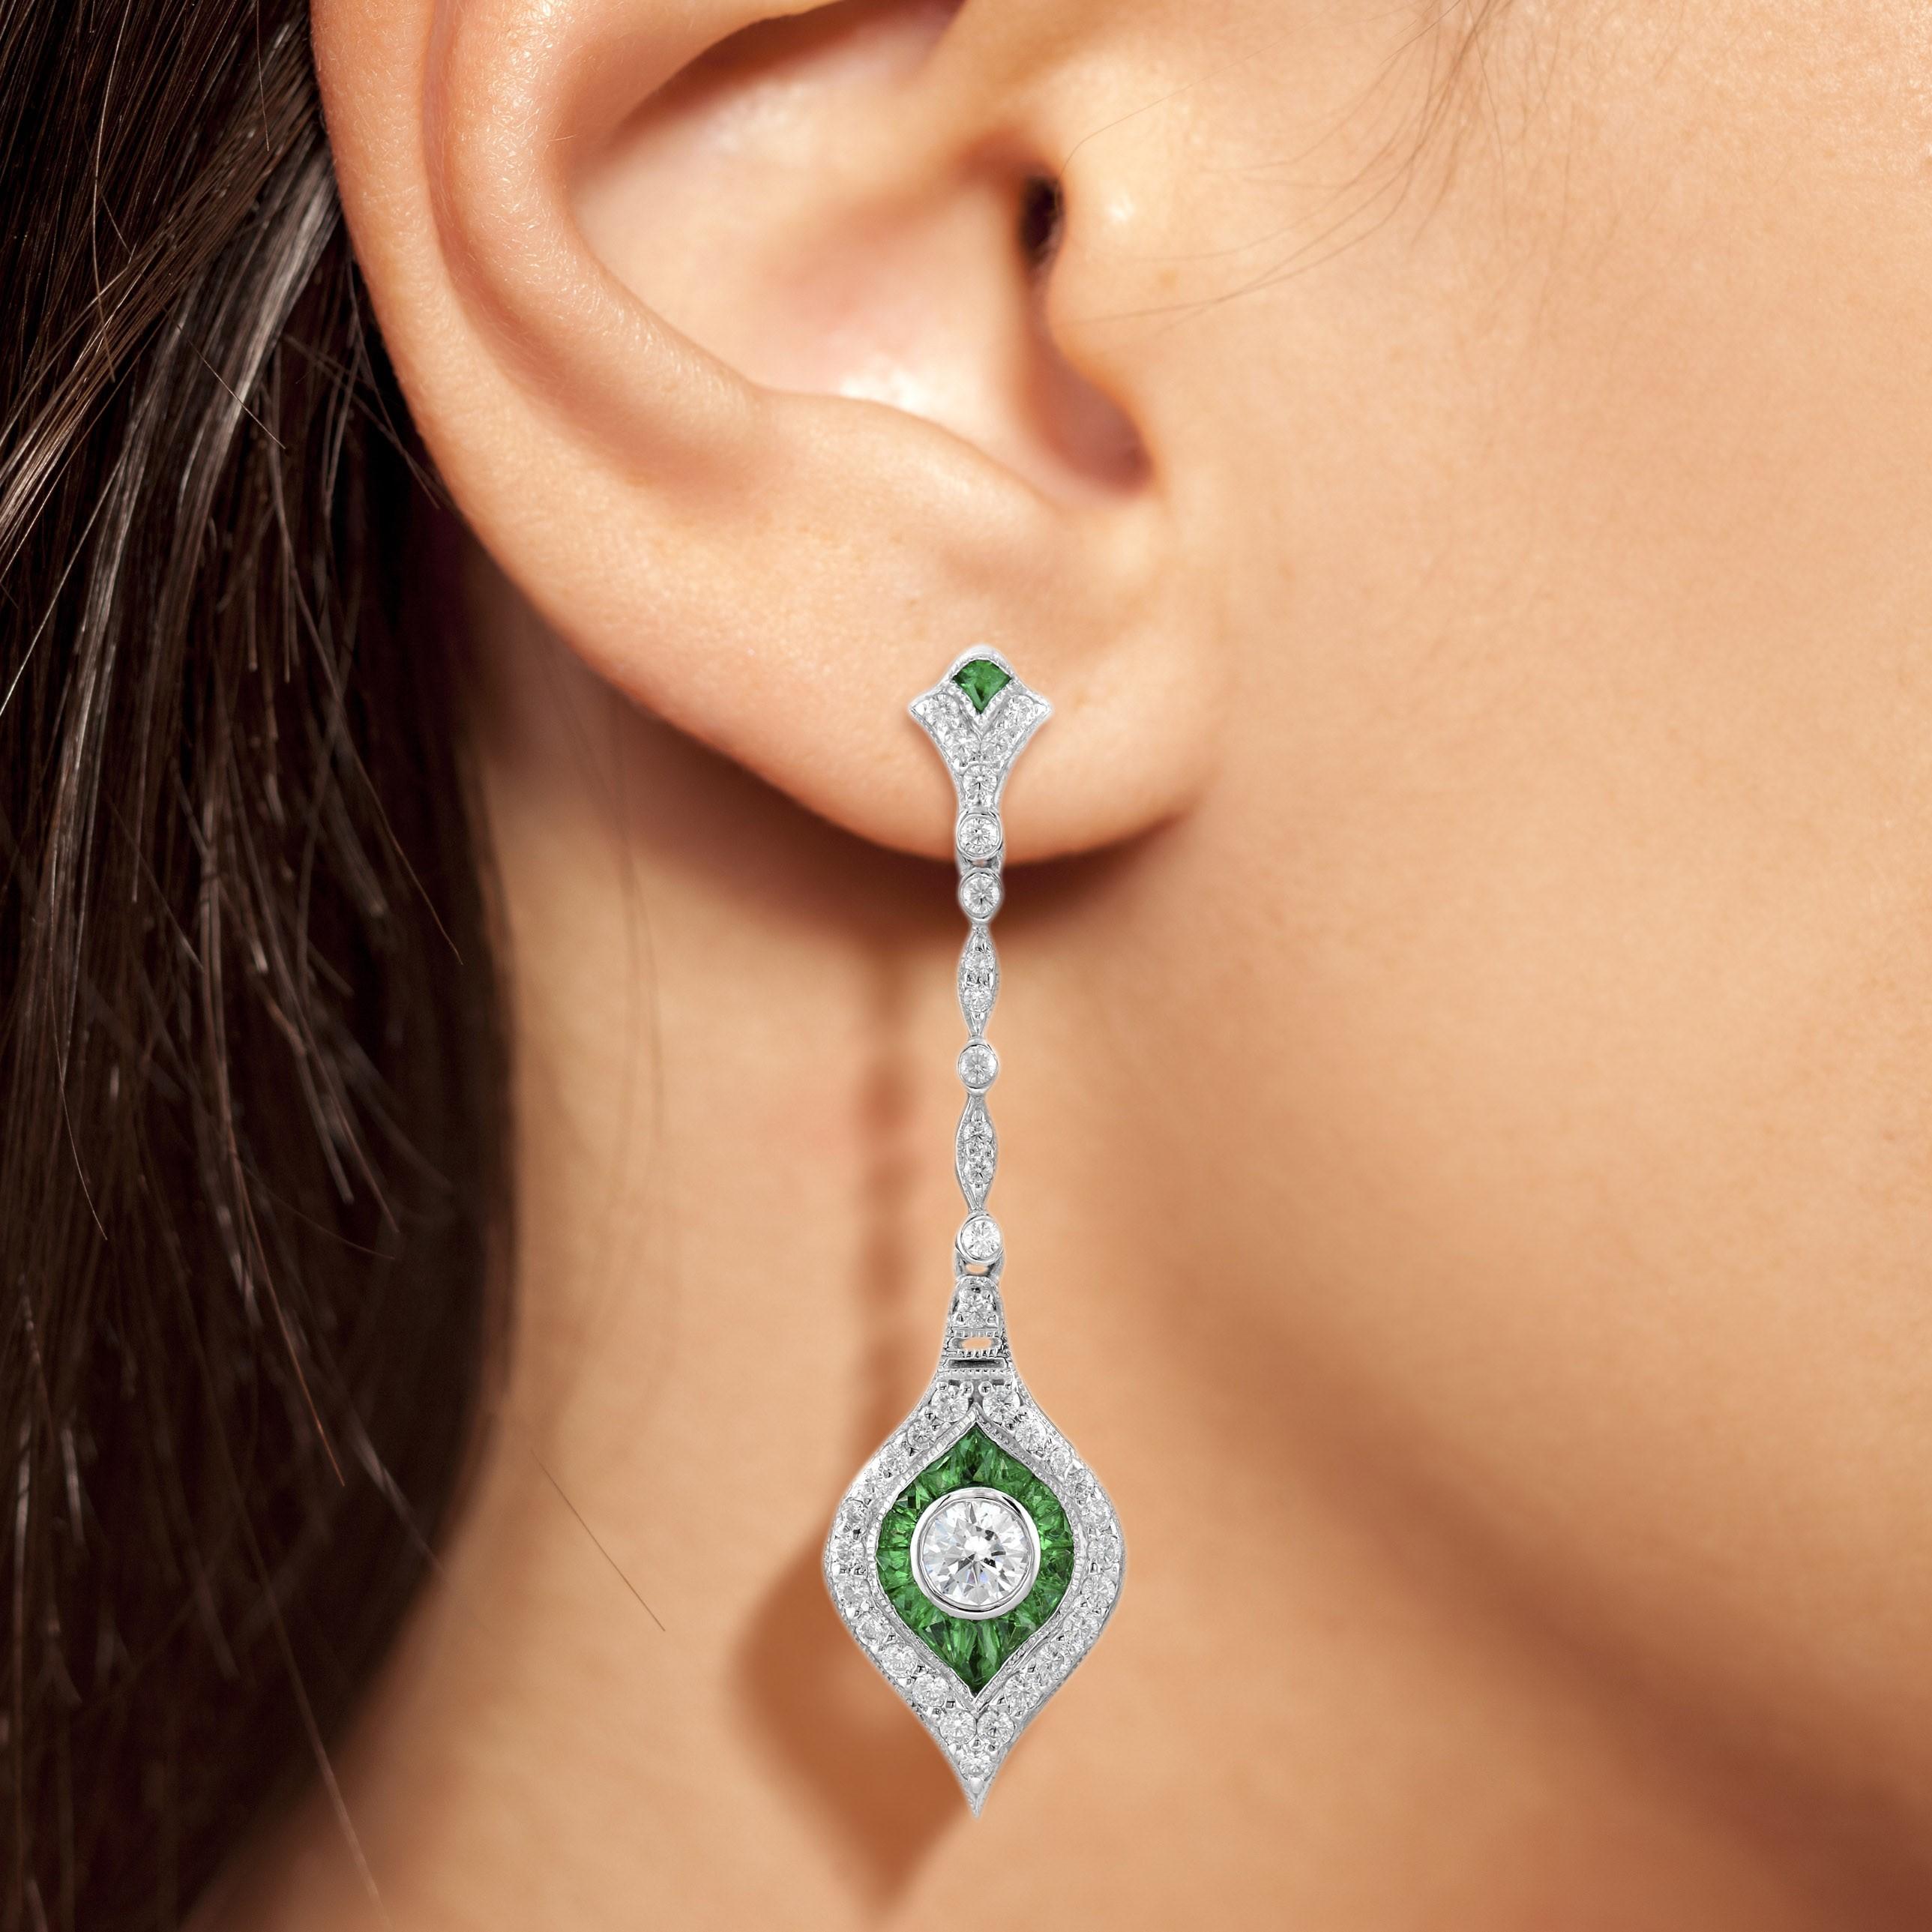 These long dangle earrings will elongate your face shapes and complements your features! They encompass 0.50 carats of round brilliant center diamonds, 2.04 carats emerald and 0.76 carats accents diamonds all set in 14k white gold.

Earrings